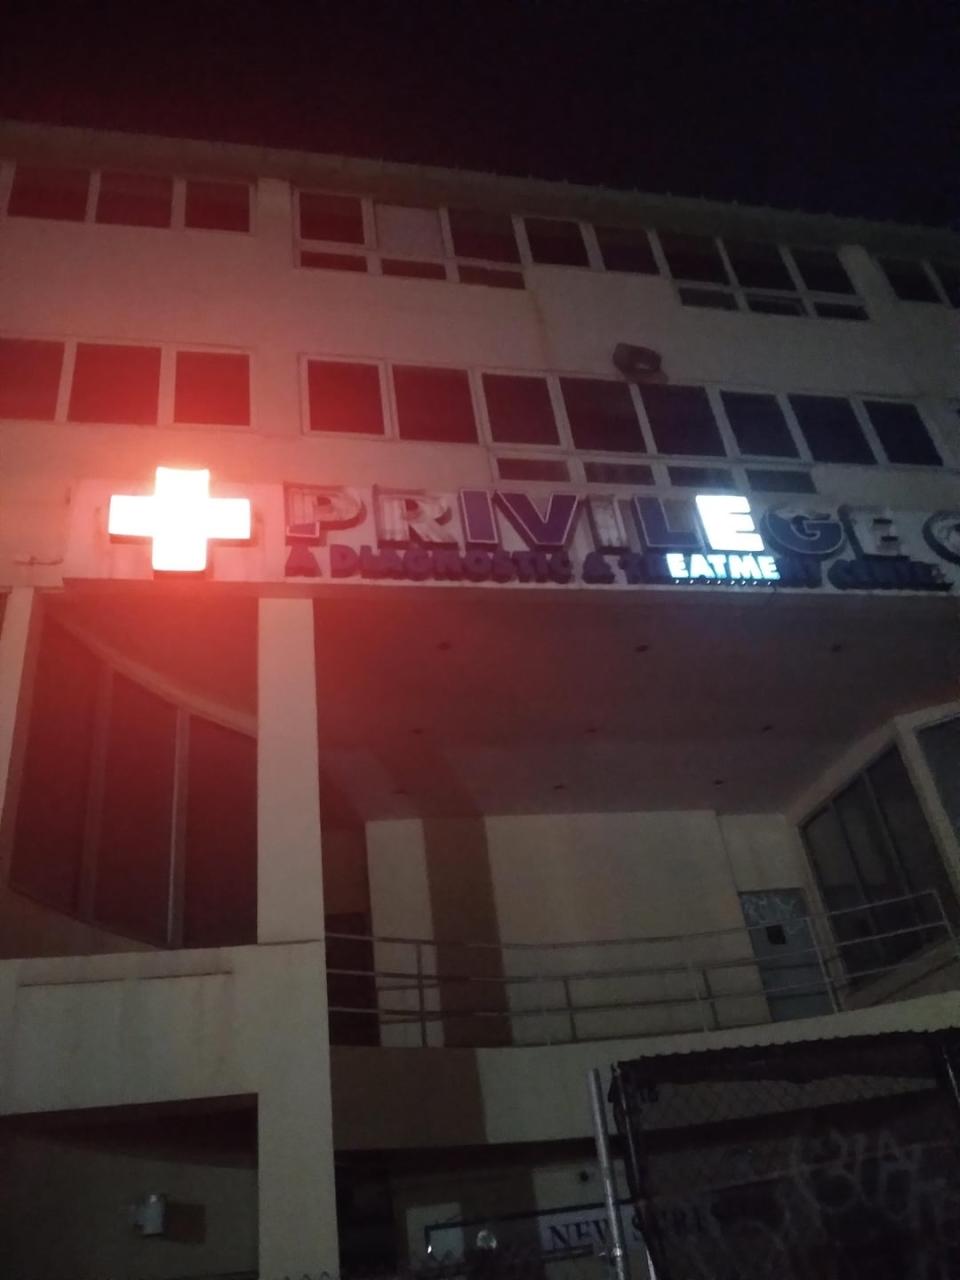 A treatment center with all letters burnt out except the ones that spell 